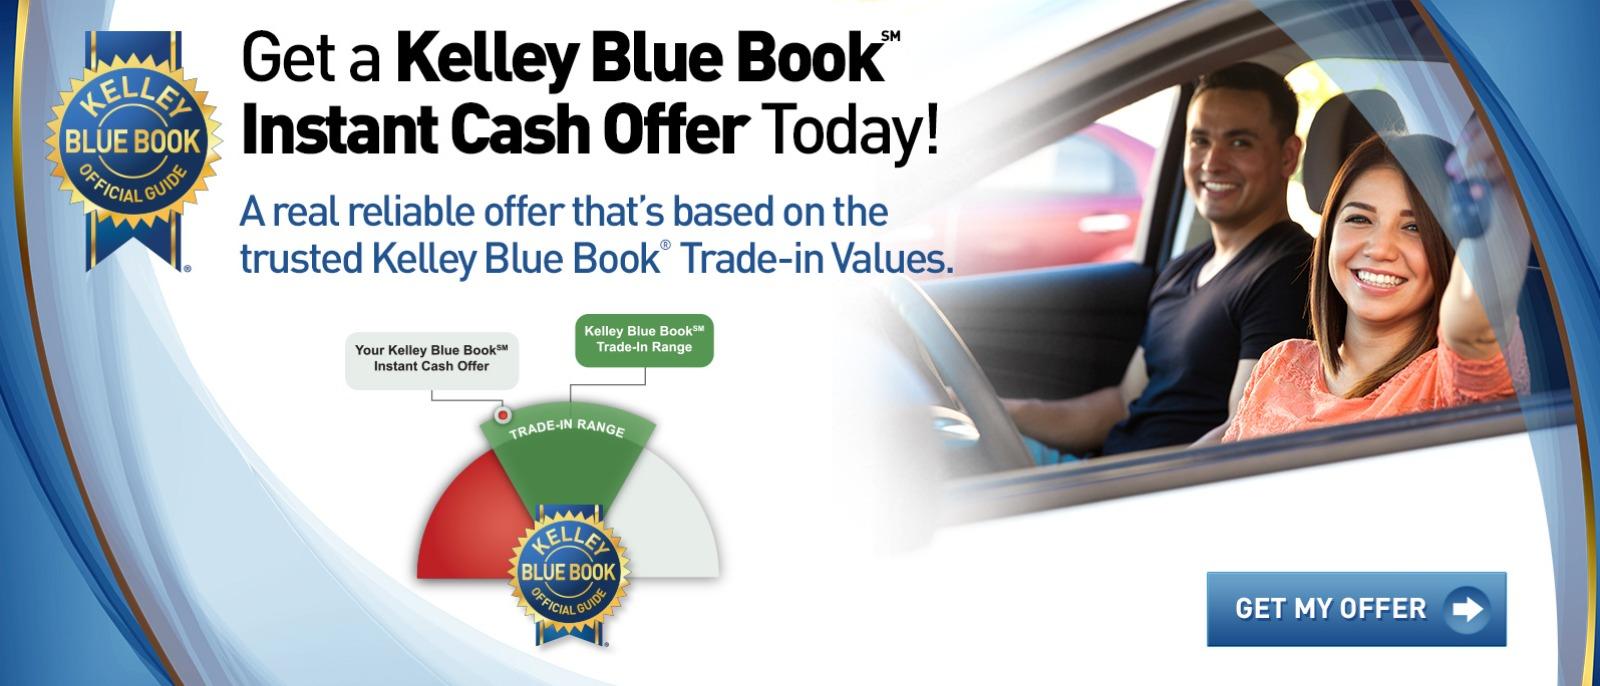 Get a Kelley Blue Book Instant Cash Offer Today! 
A real reliable offer that's based on the trusted Kelley Blue Book Trade-in Values.
Get My Offer